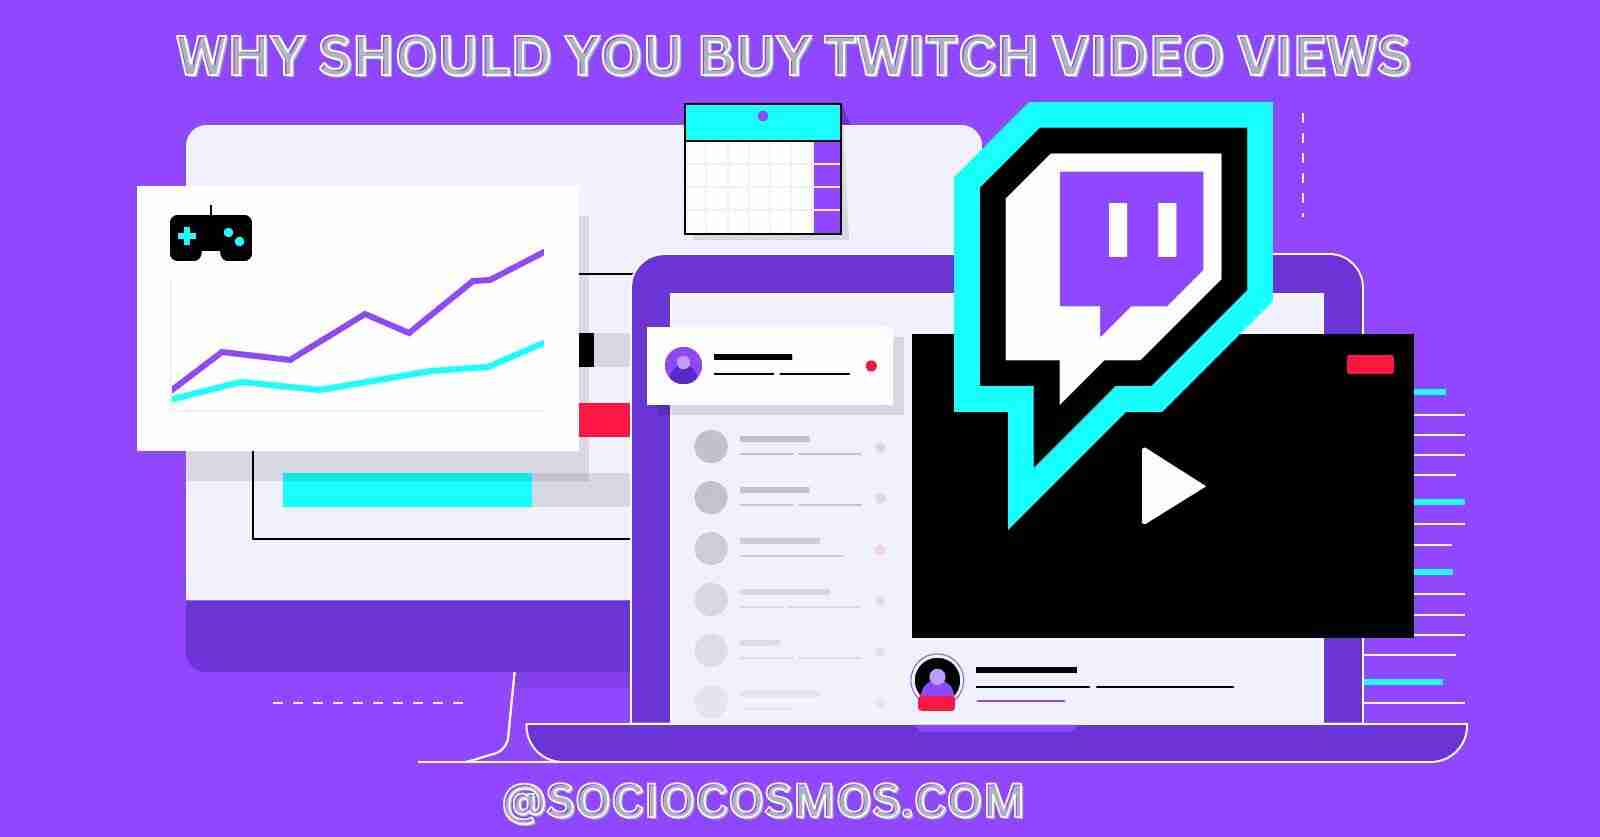 WHY SHOULD YOU BUY TWITCH VIDEO VIEWS (1)